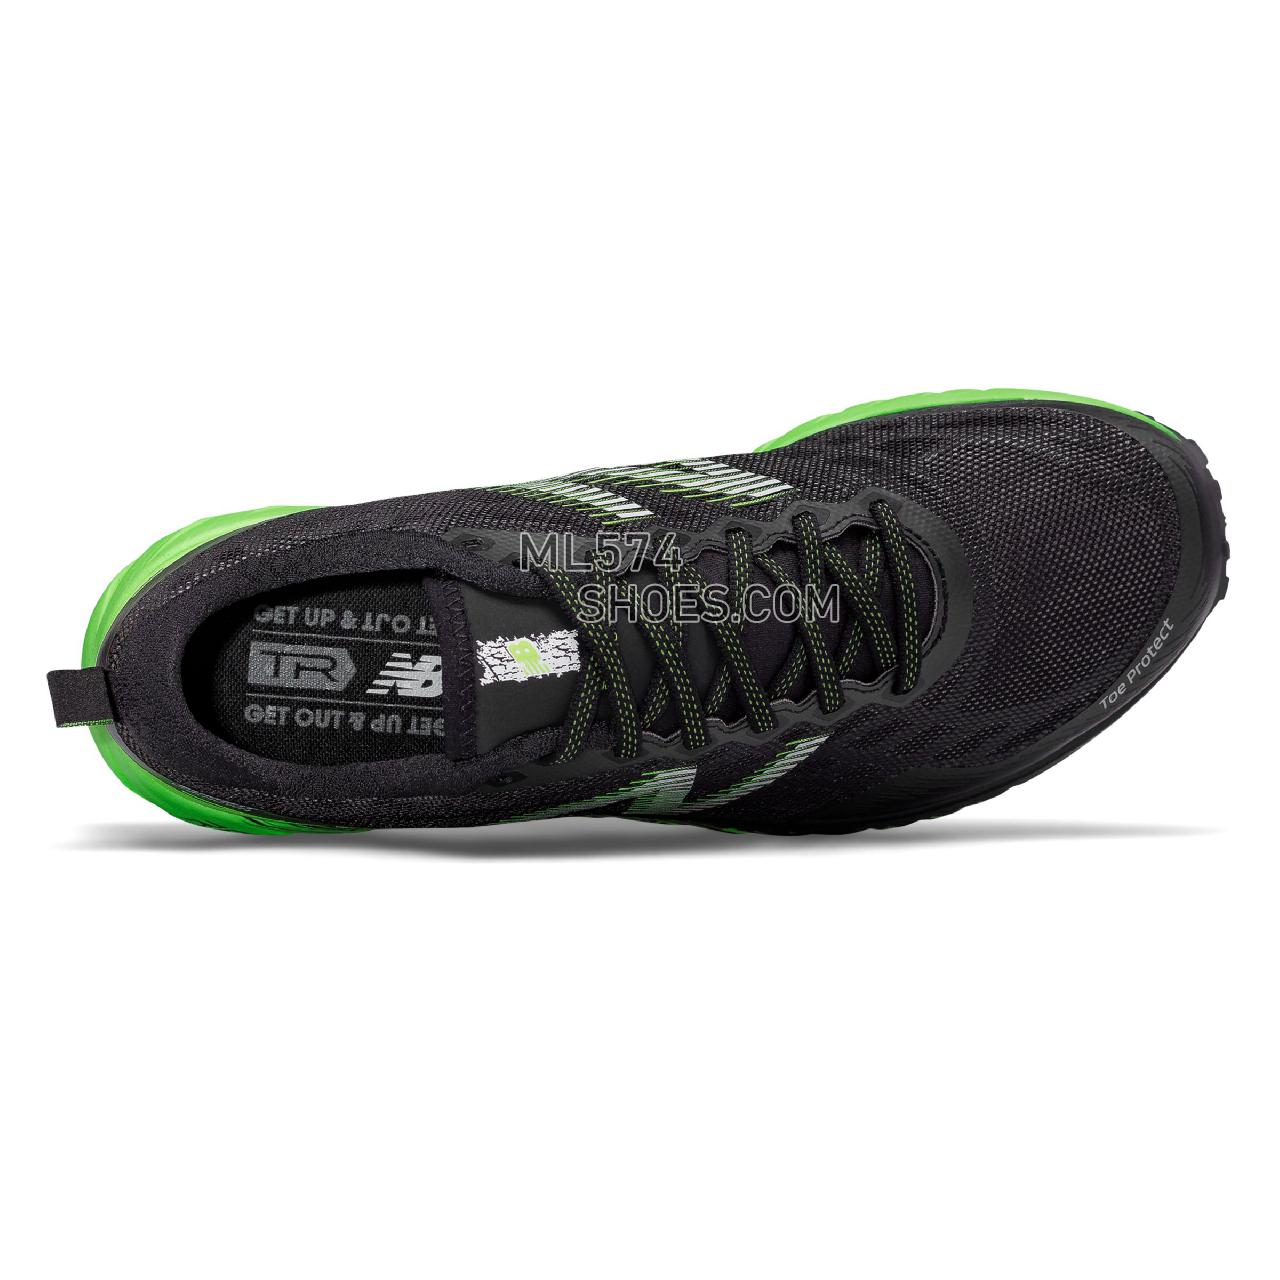 New Balance Summit Unknown - Men's  - Running Black with Energy Lime - MTUNKNB